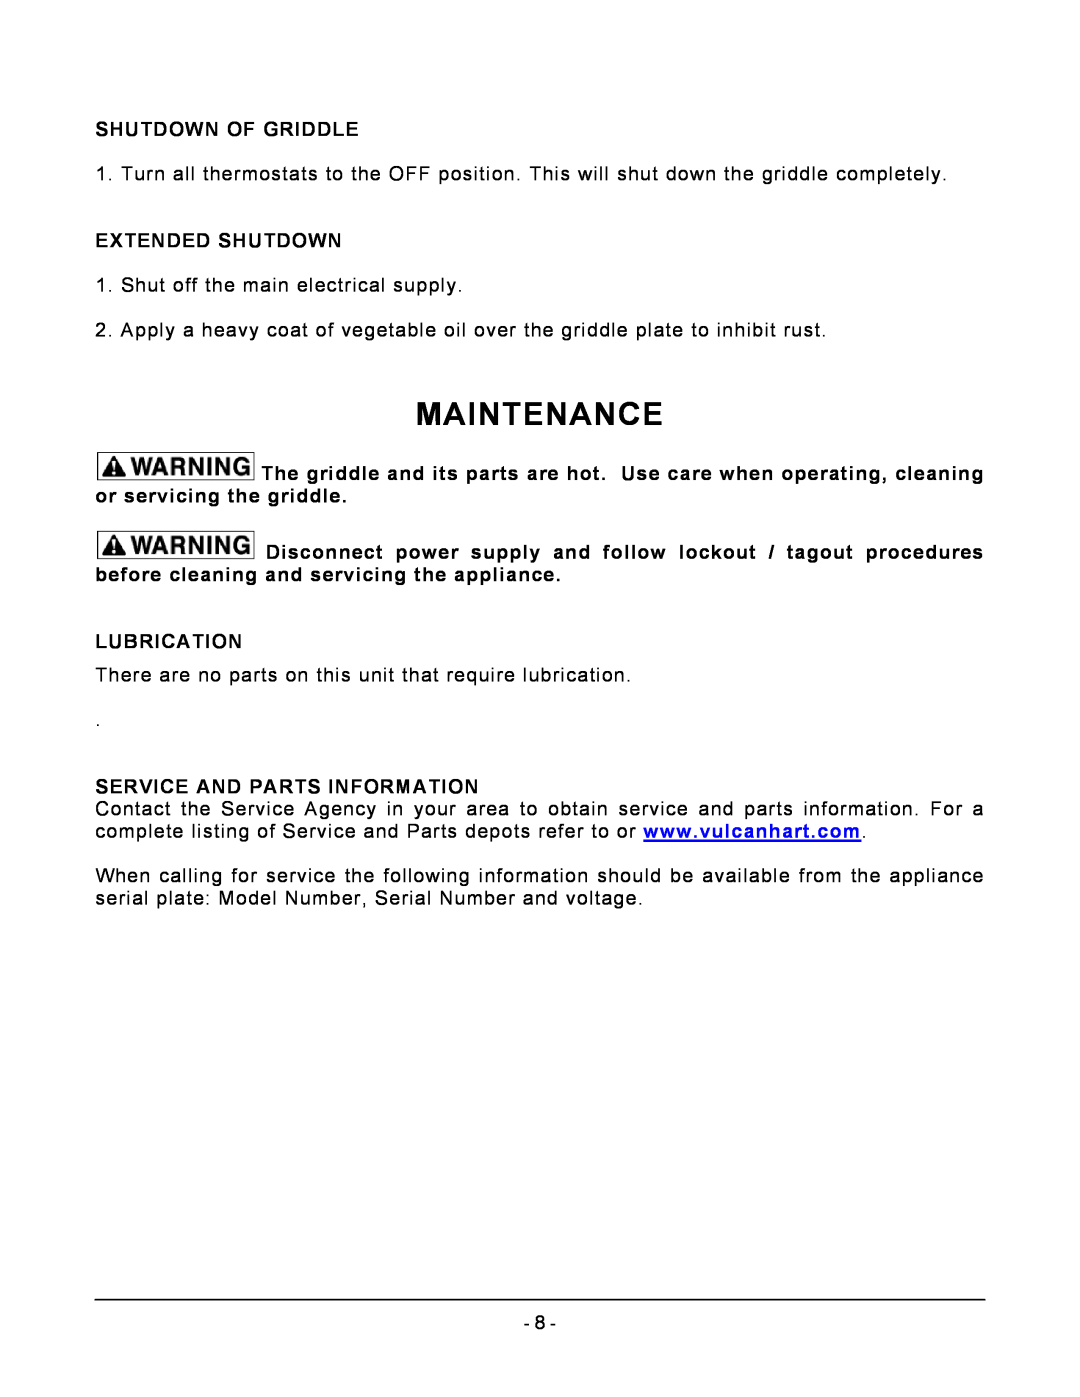 Vulcan-Hart RRE24, RRE60 Maintenance, Shutdown Of Griddle, Extended Shutdown, Lubrication, Service And Parts Information 